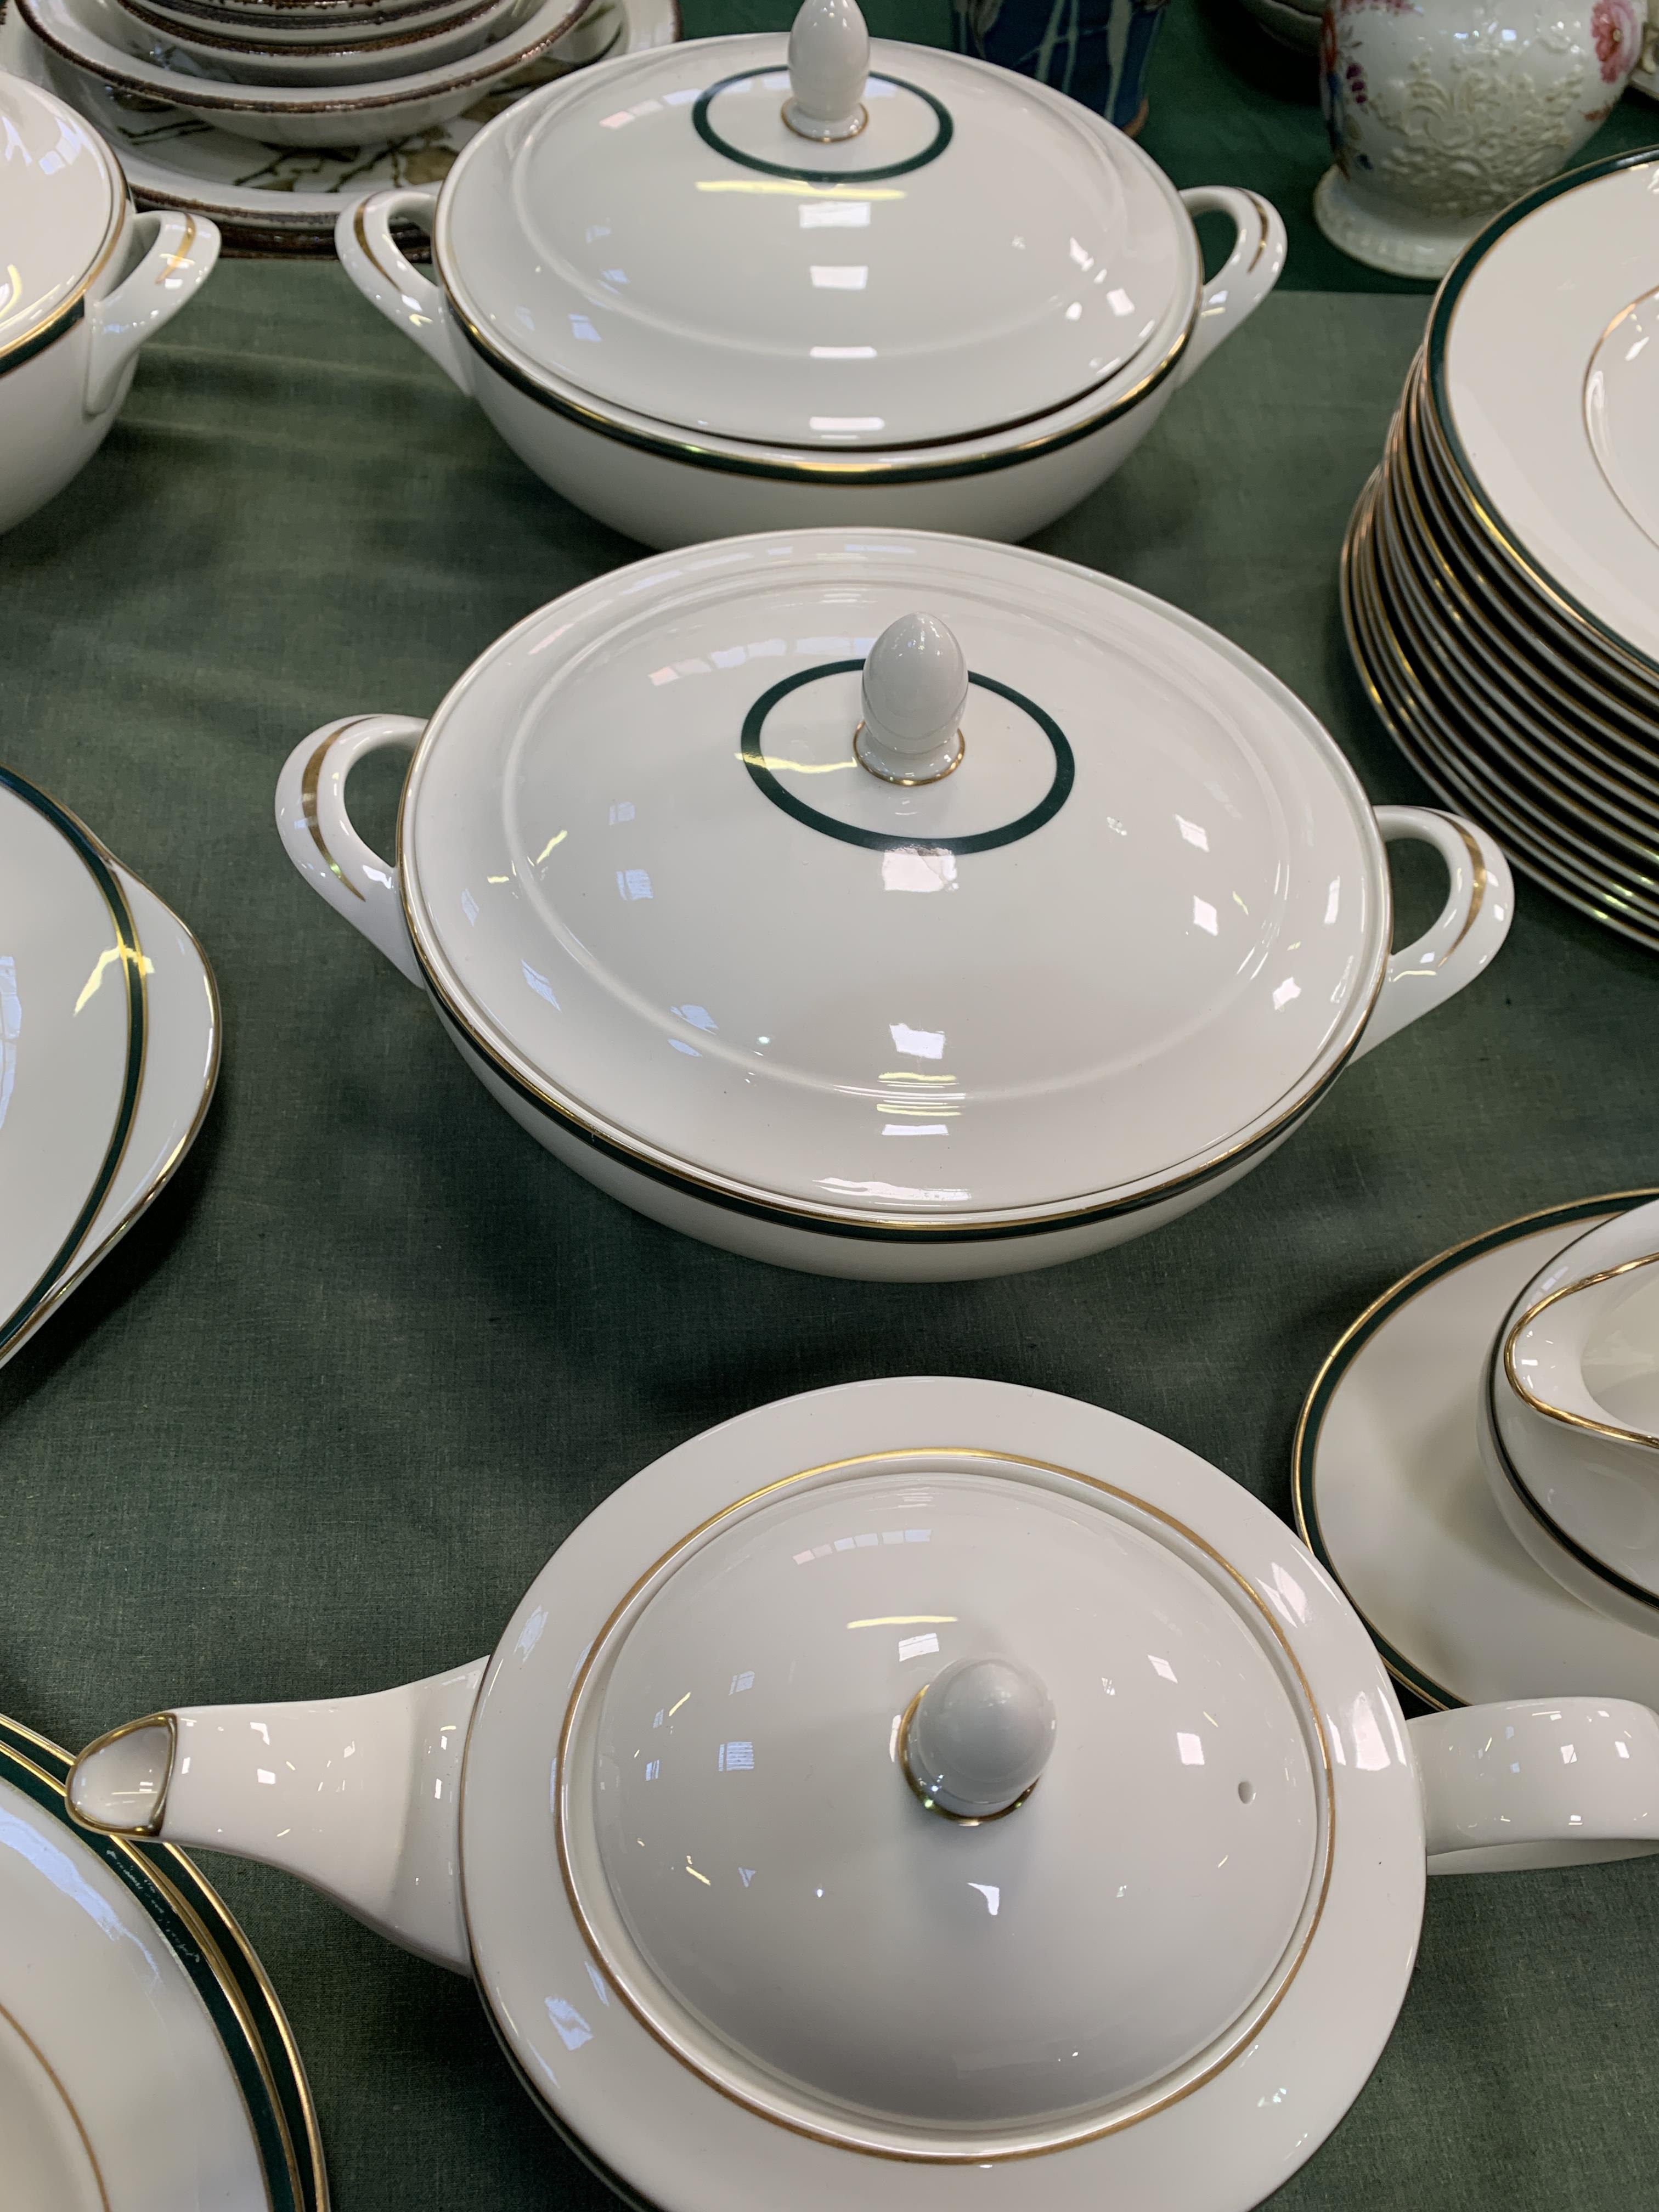 Royal Doulton 'Oxford Green' ten place setting dinner service - Image 3 of 6